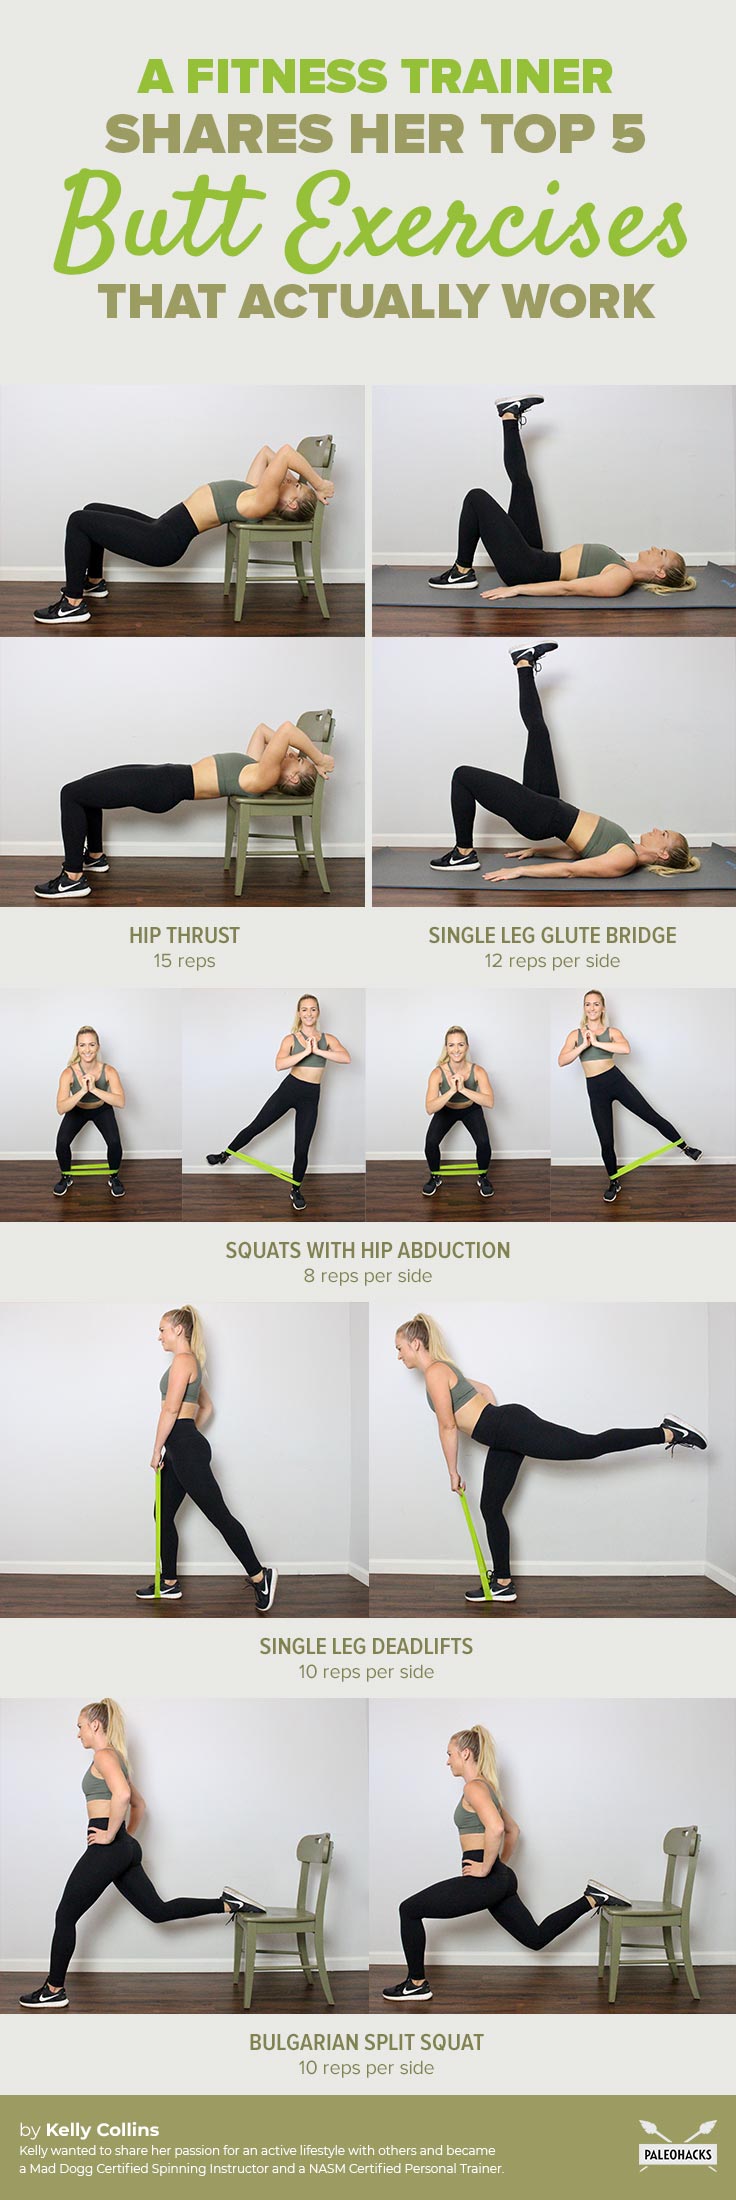 If you’re looking to tone up your butt, look no further than these five exercises that truly get the job done. Do this workout up to two times per week.